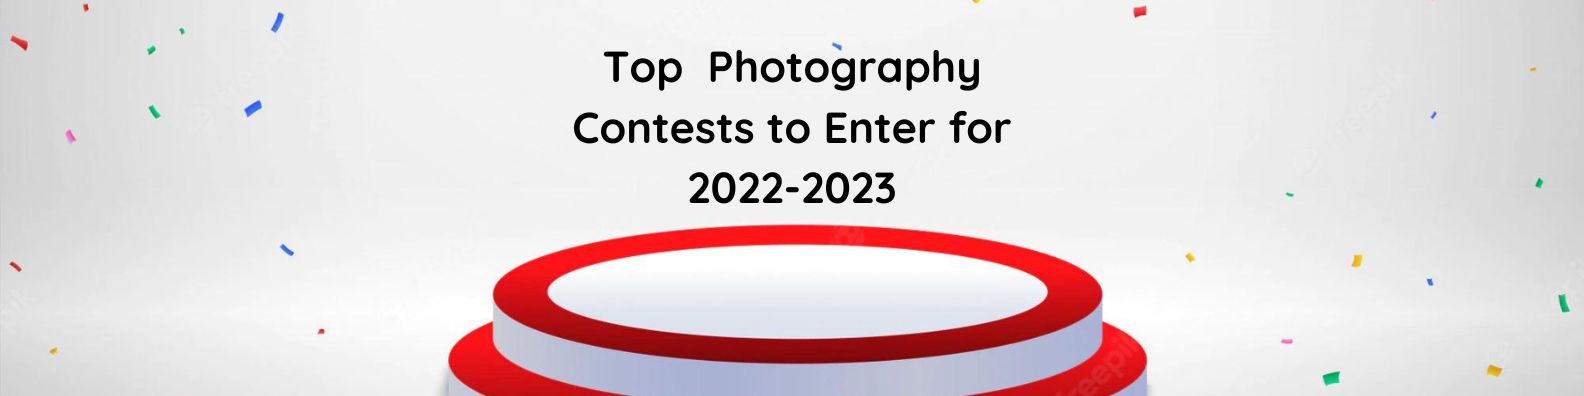 Top Photography Contests to Enter for 2022-2023